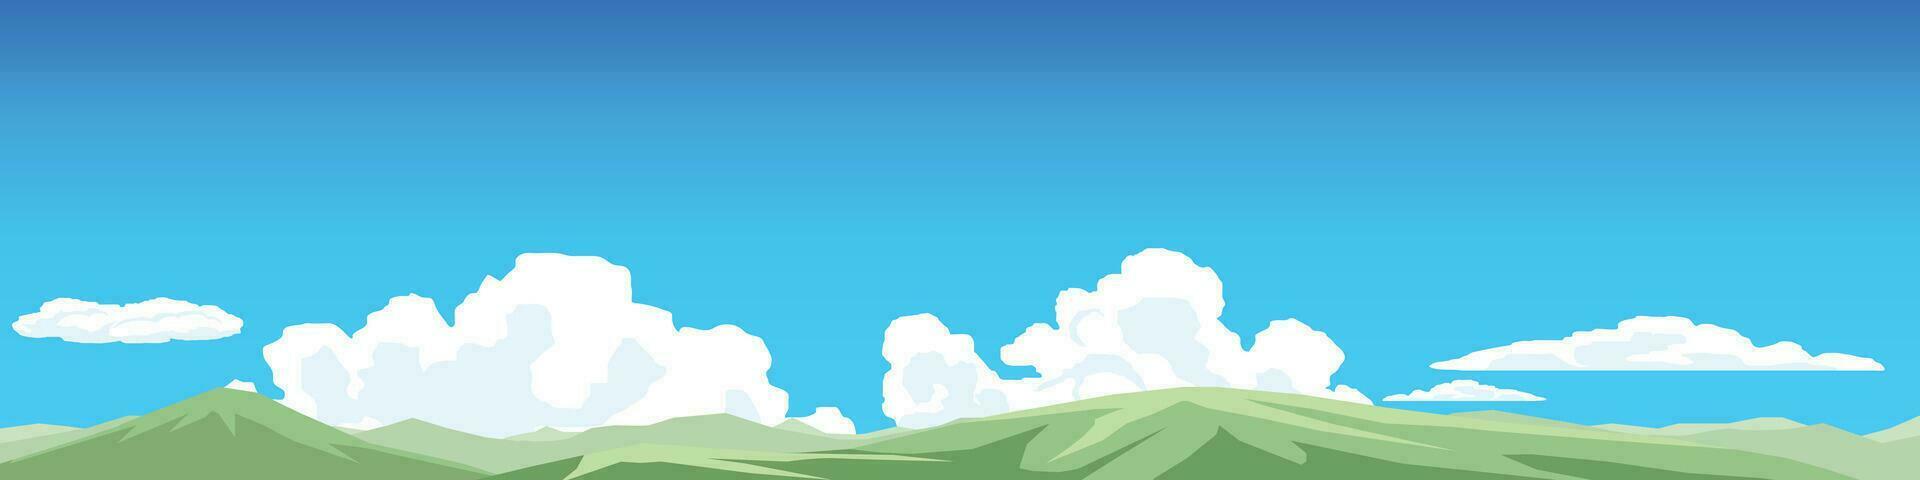 Vector or Illustrator landscape of nature blue sky and white clouds. under view with green mountain. for background.